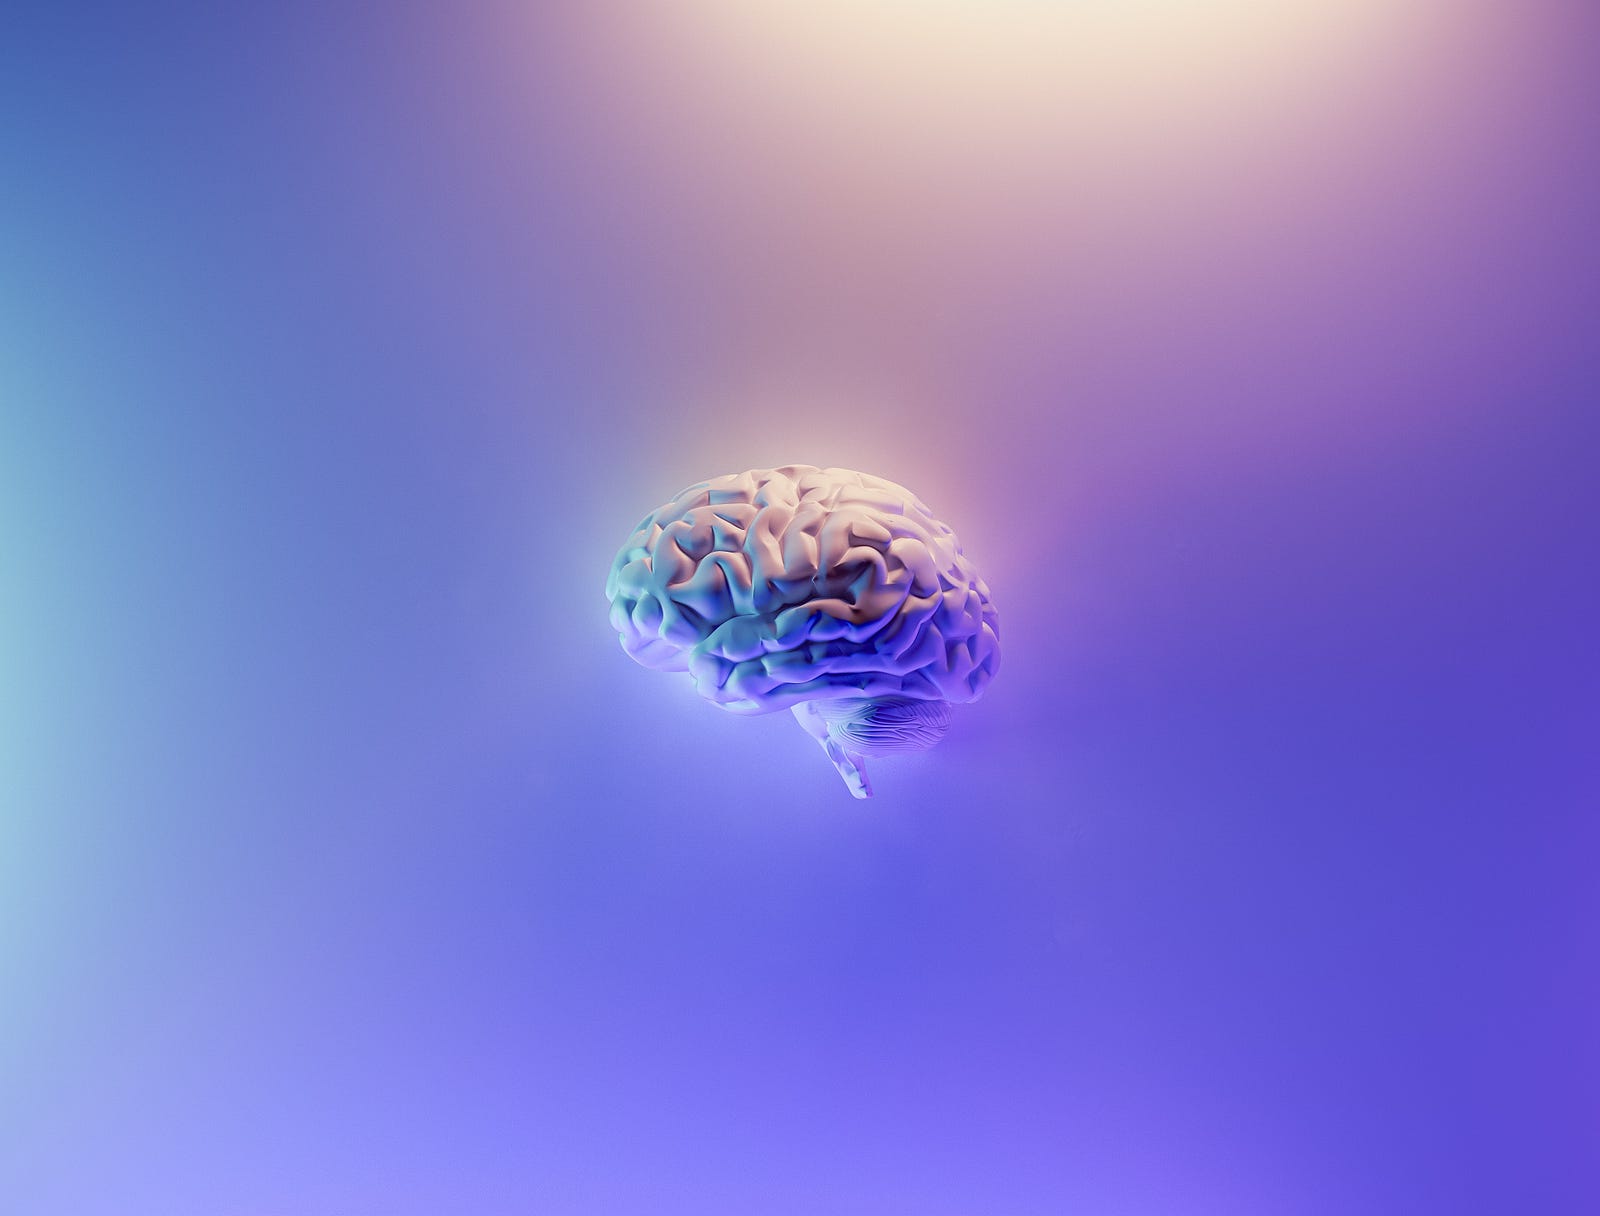 An illustration of a brain (lateral view) floating against a purple background. Low HDL cholesterol is associated with lower gray matter volume in cognitively healthy adults. Could this change theoretically put them at a higher risk of cognitive decline?